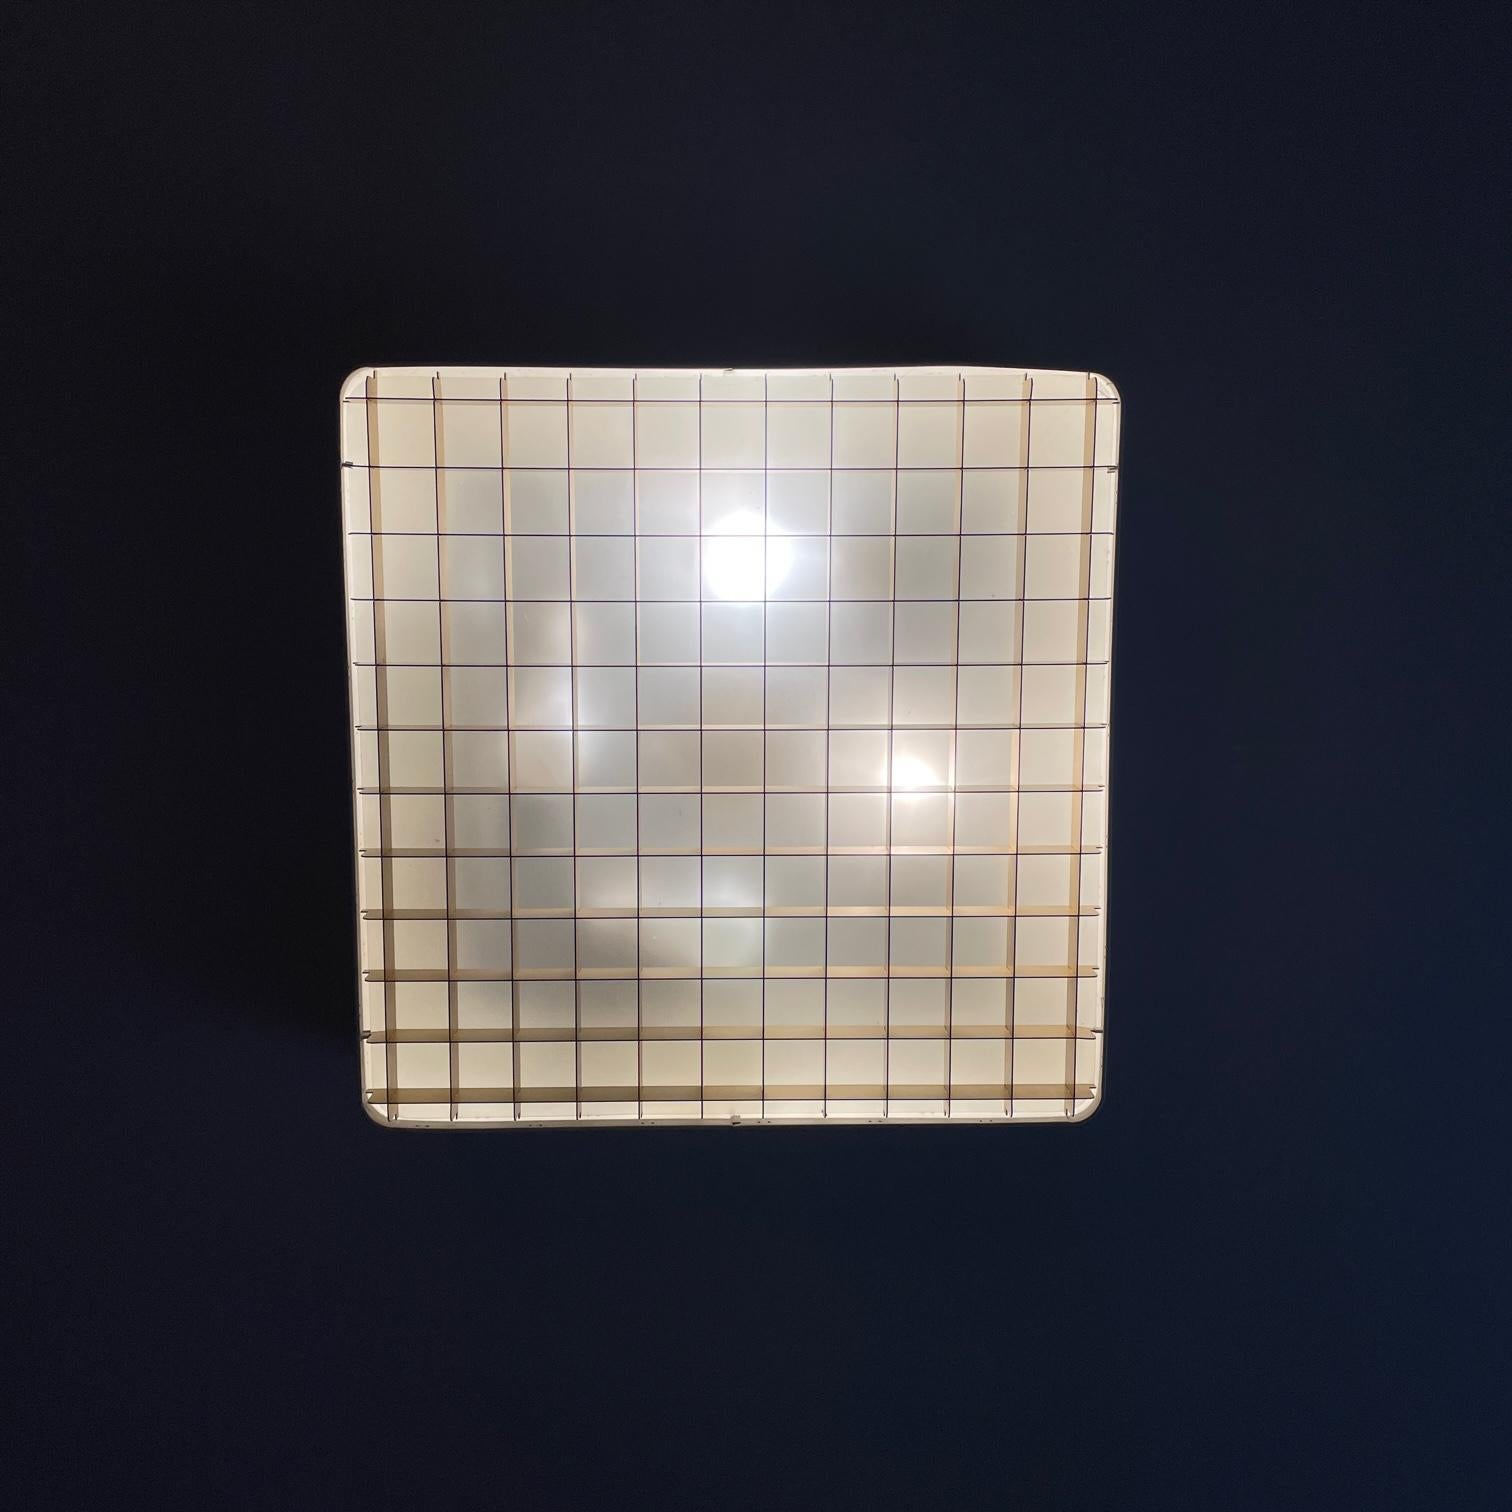 Rare 1960s Paavo Tynell Starry Sky 9068 Lamp by Lightolier Ceiling Mount Large In Fair Condition For Sale In Hyattsville, MD